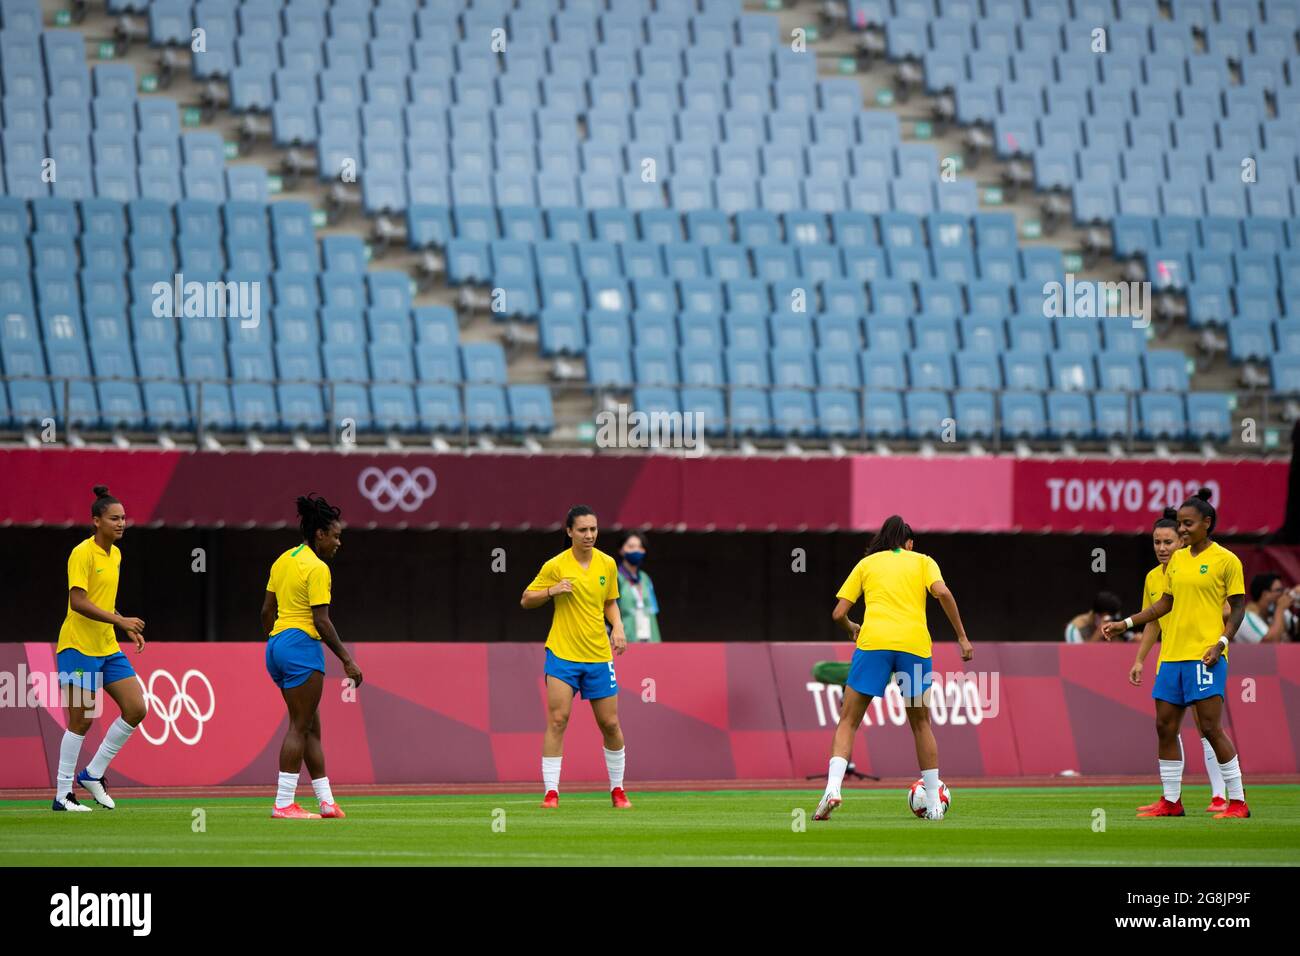 RIFU, JAPAN - JULY 21: Julia of Brazil warms up with her team mates during the Tokyo 2020 Olympic Football Tournament match between China and Brazil at Miyagi Stadium on July 21, 2021 in Rifu, Japan (Photo by Pablo Morano/Orange Pictures) Stock Photo